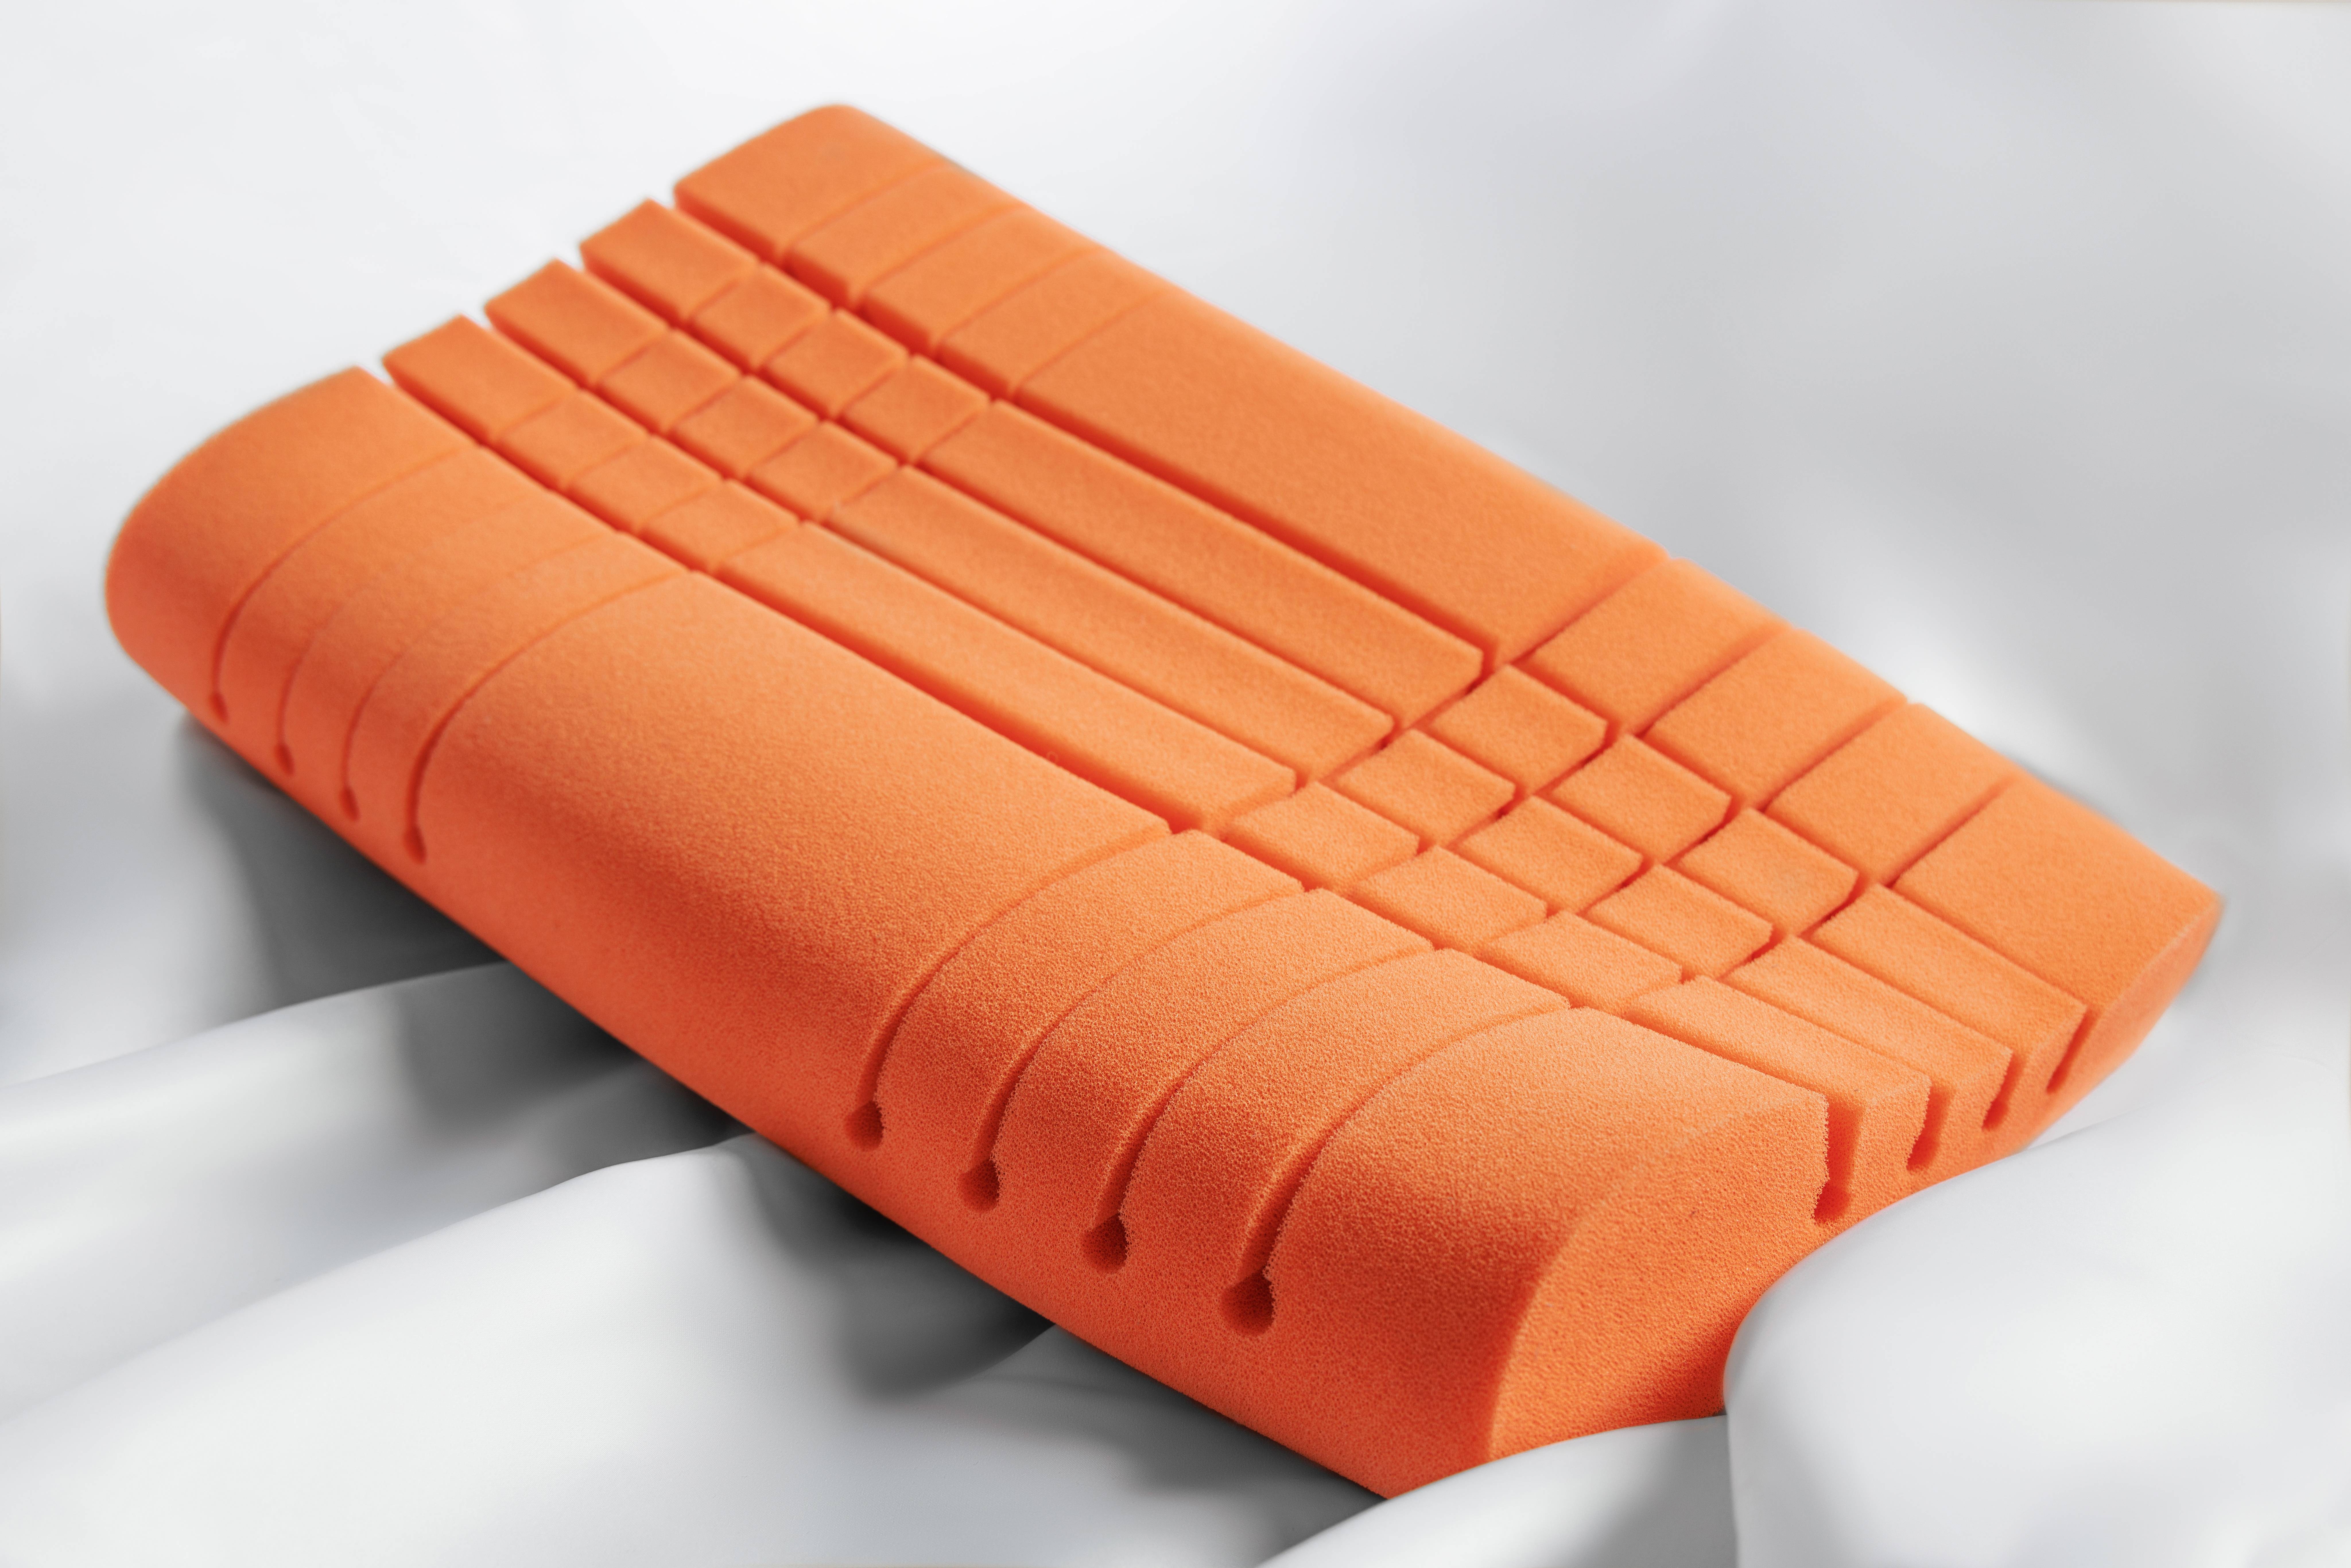 French Design Awards Winner - Washable silicone genki pillow by Yuanqi Breathing (Shenzhen) Technology Co., Ltd